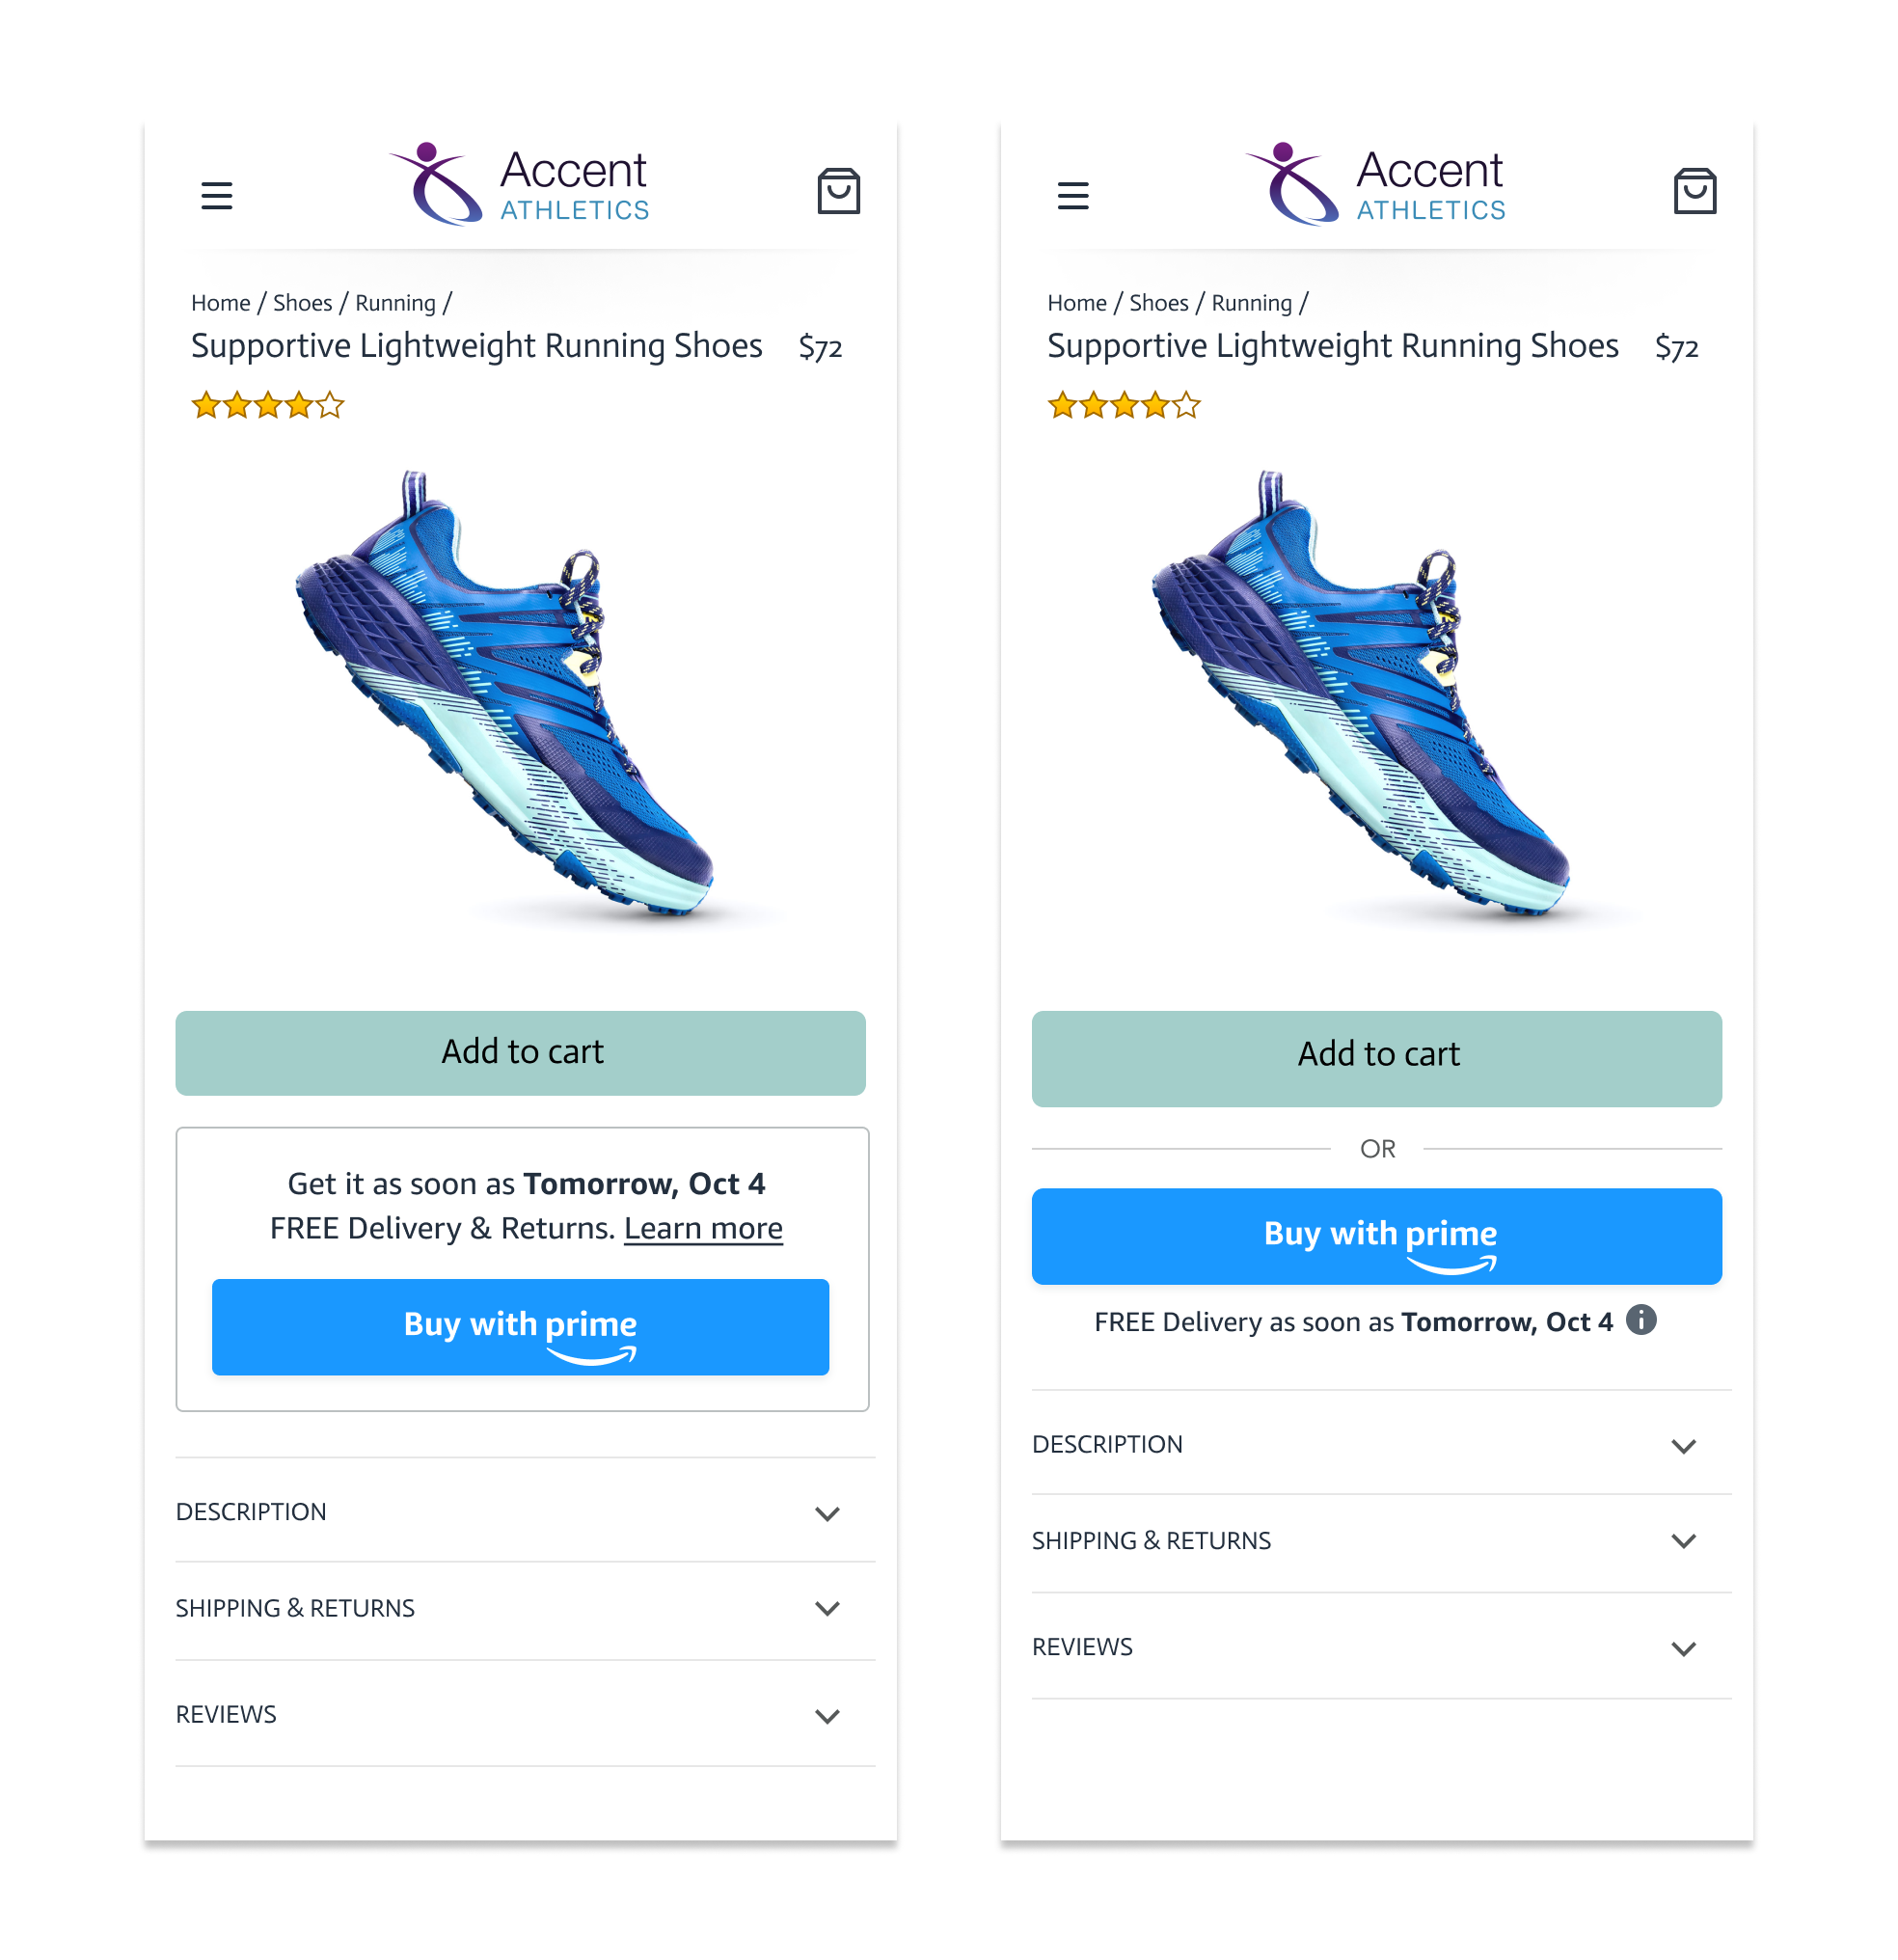 Product detail page showing two variations of the Buy with prime button